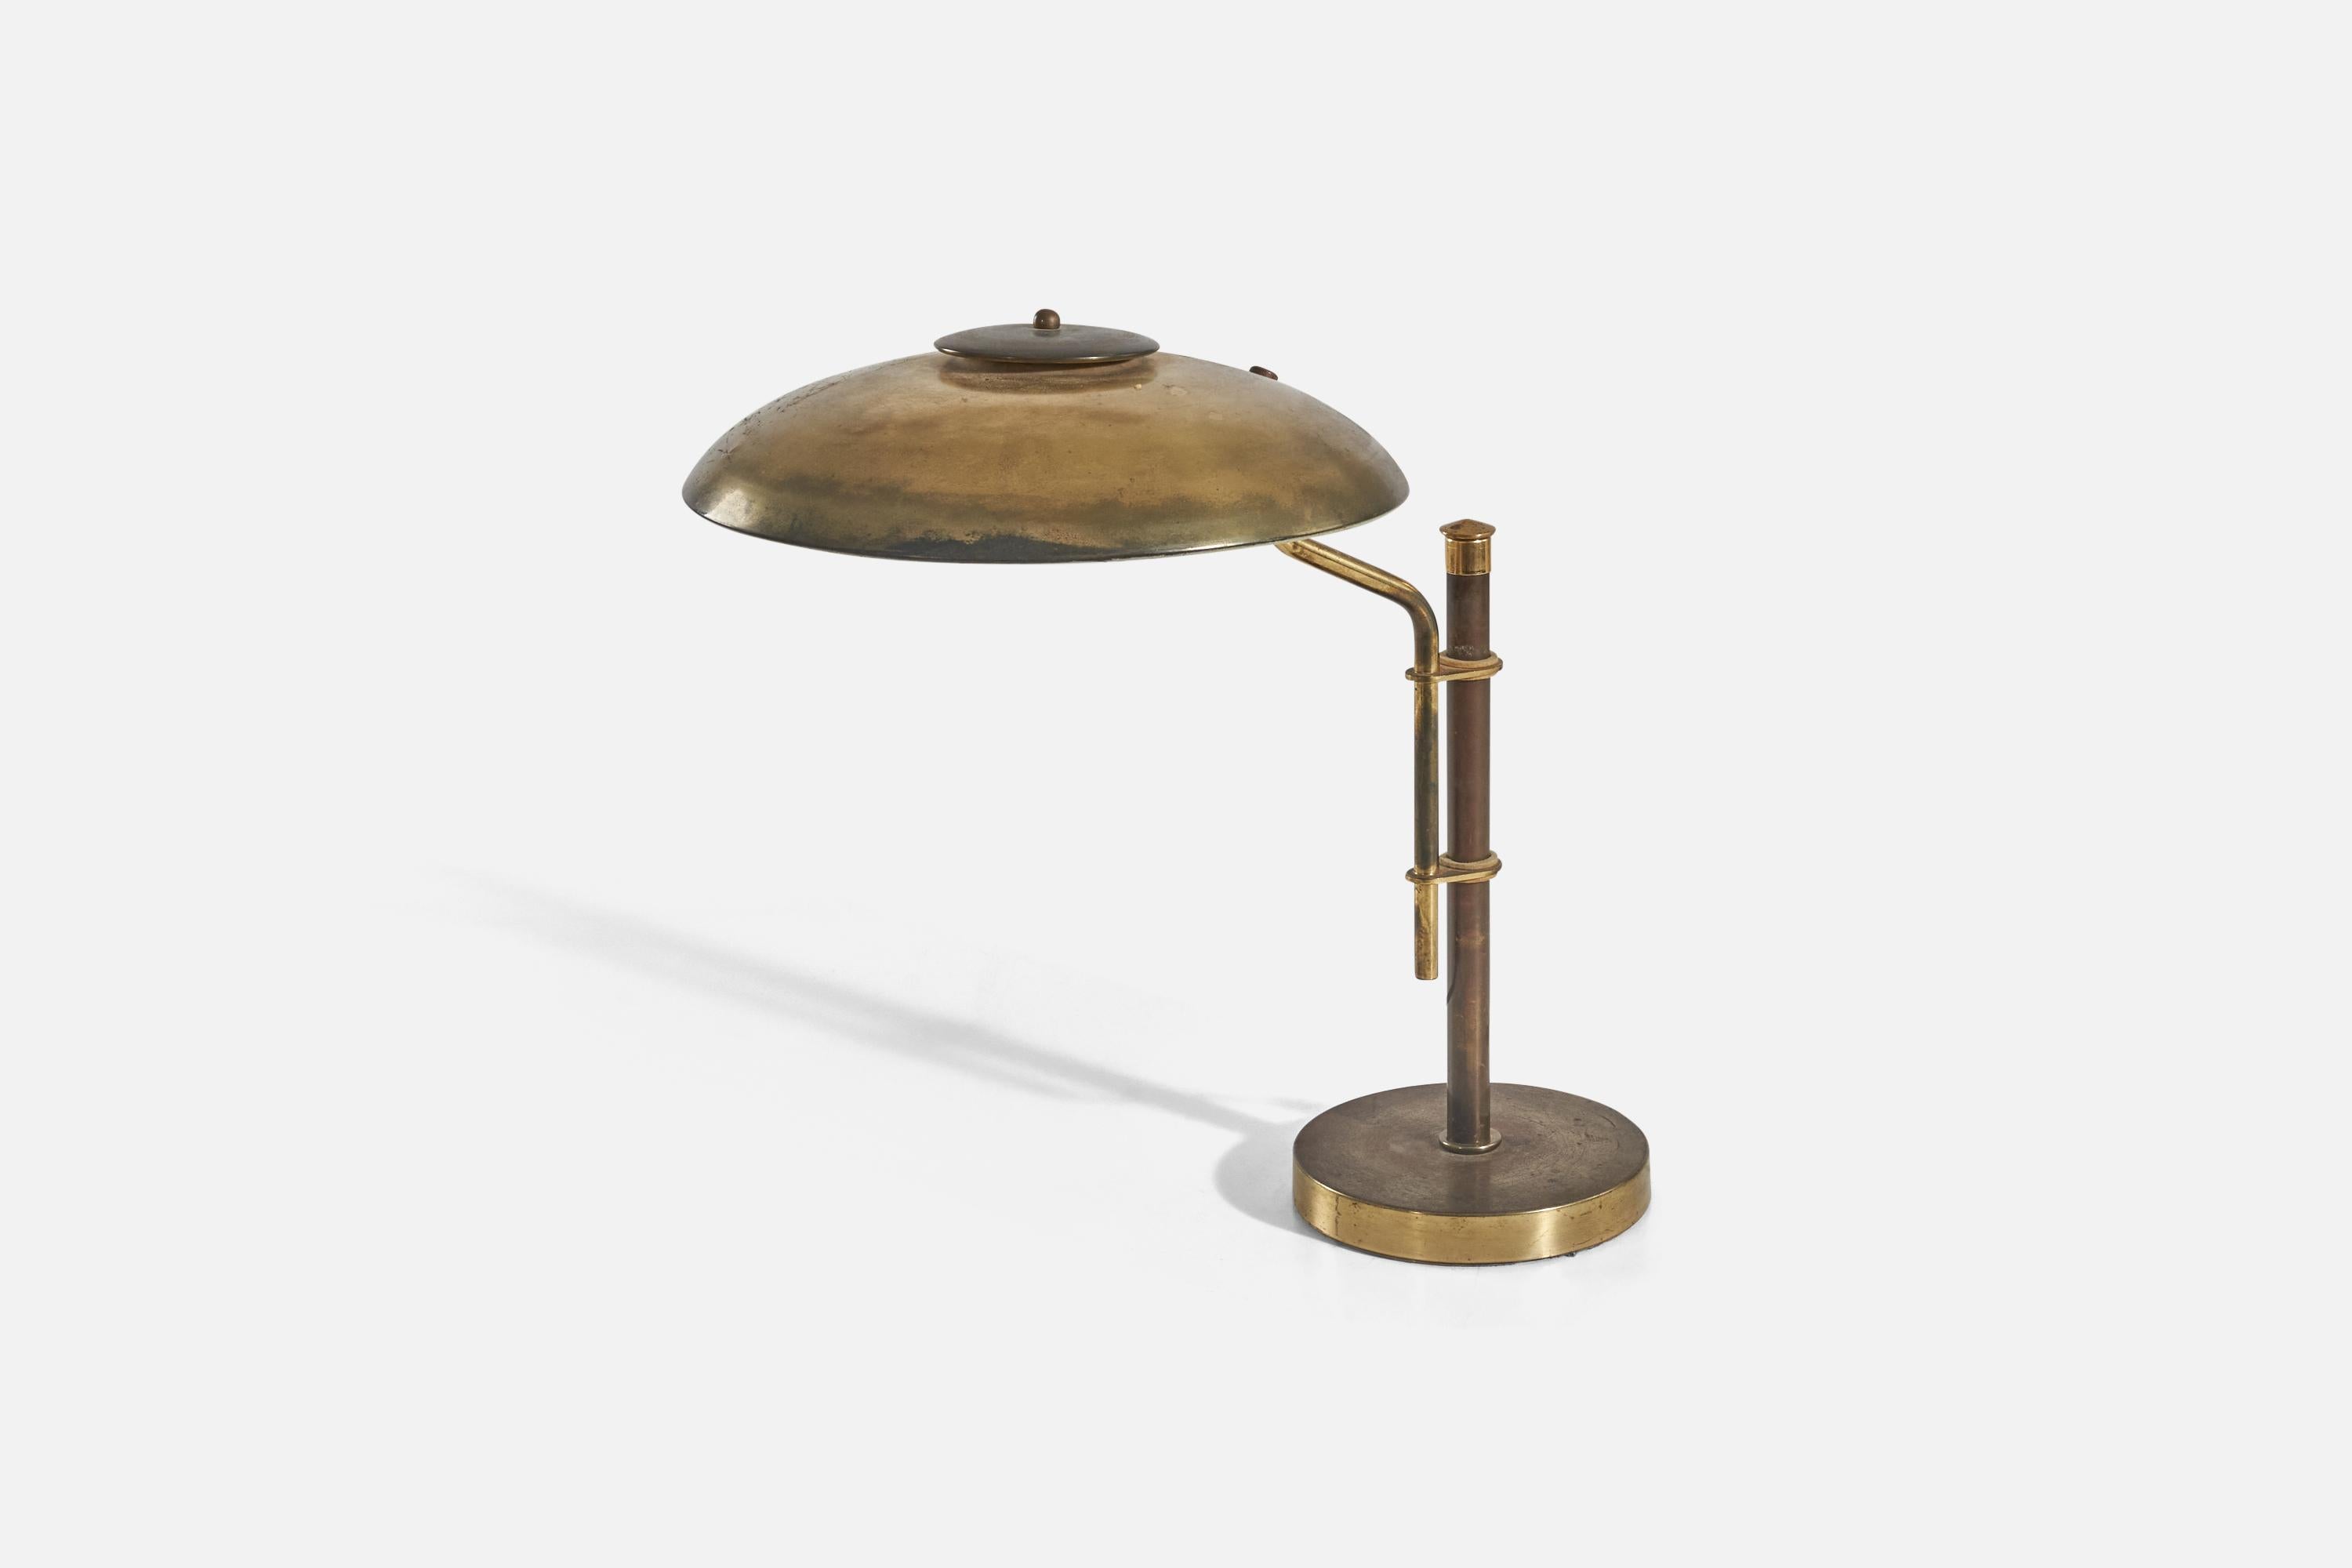 A brass table lamp designed and produced in America, 1940s.

Variable dimensions, measured as illustrated in the first image.

Socket takes standard E-26 medium base bulb.

There is no maximum wattage stated on the fixture.